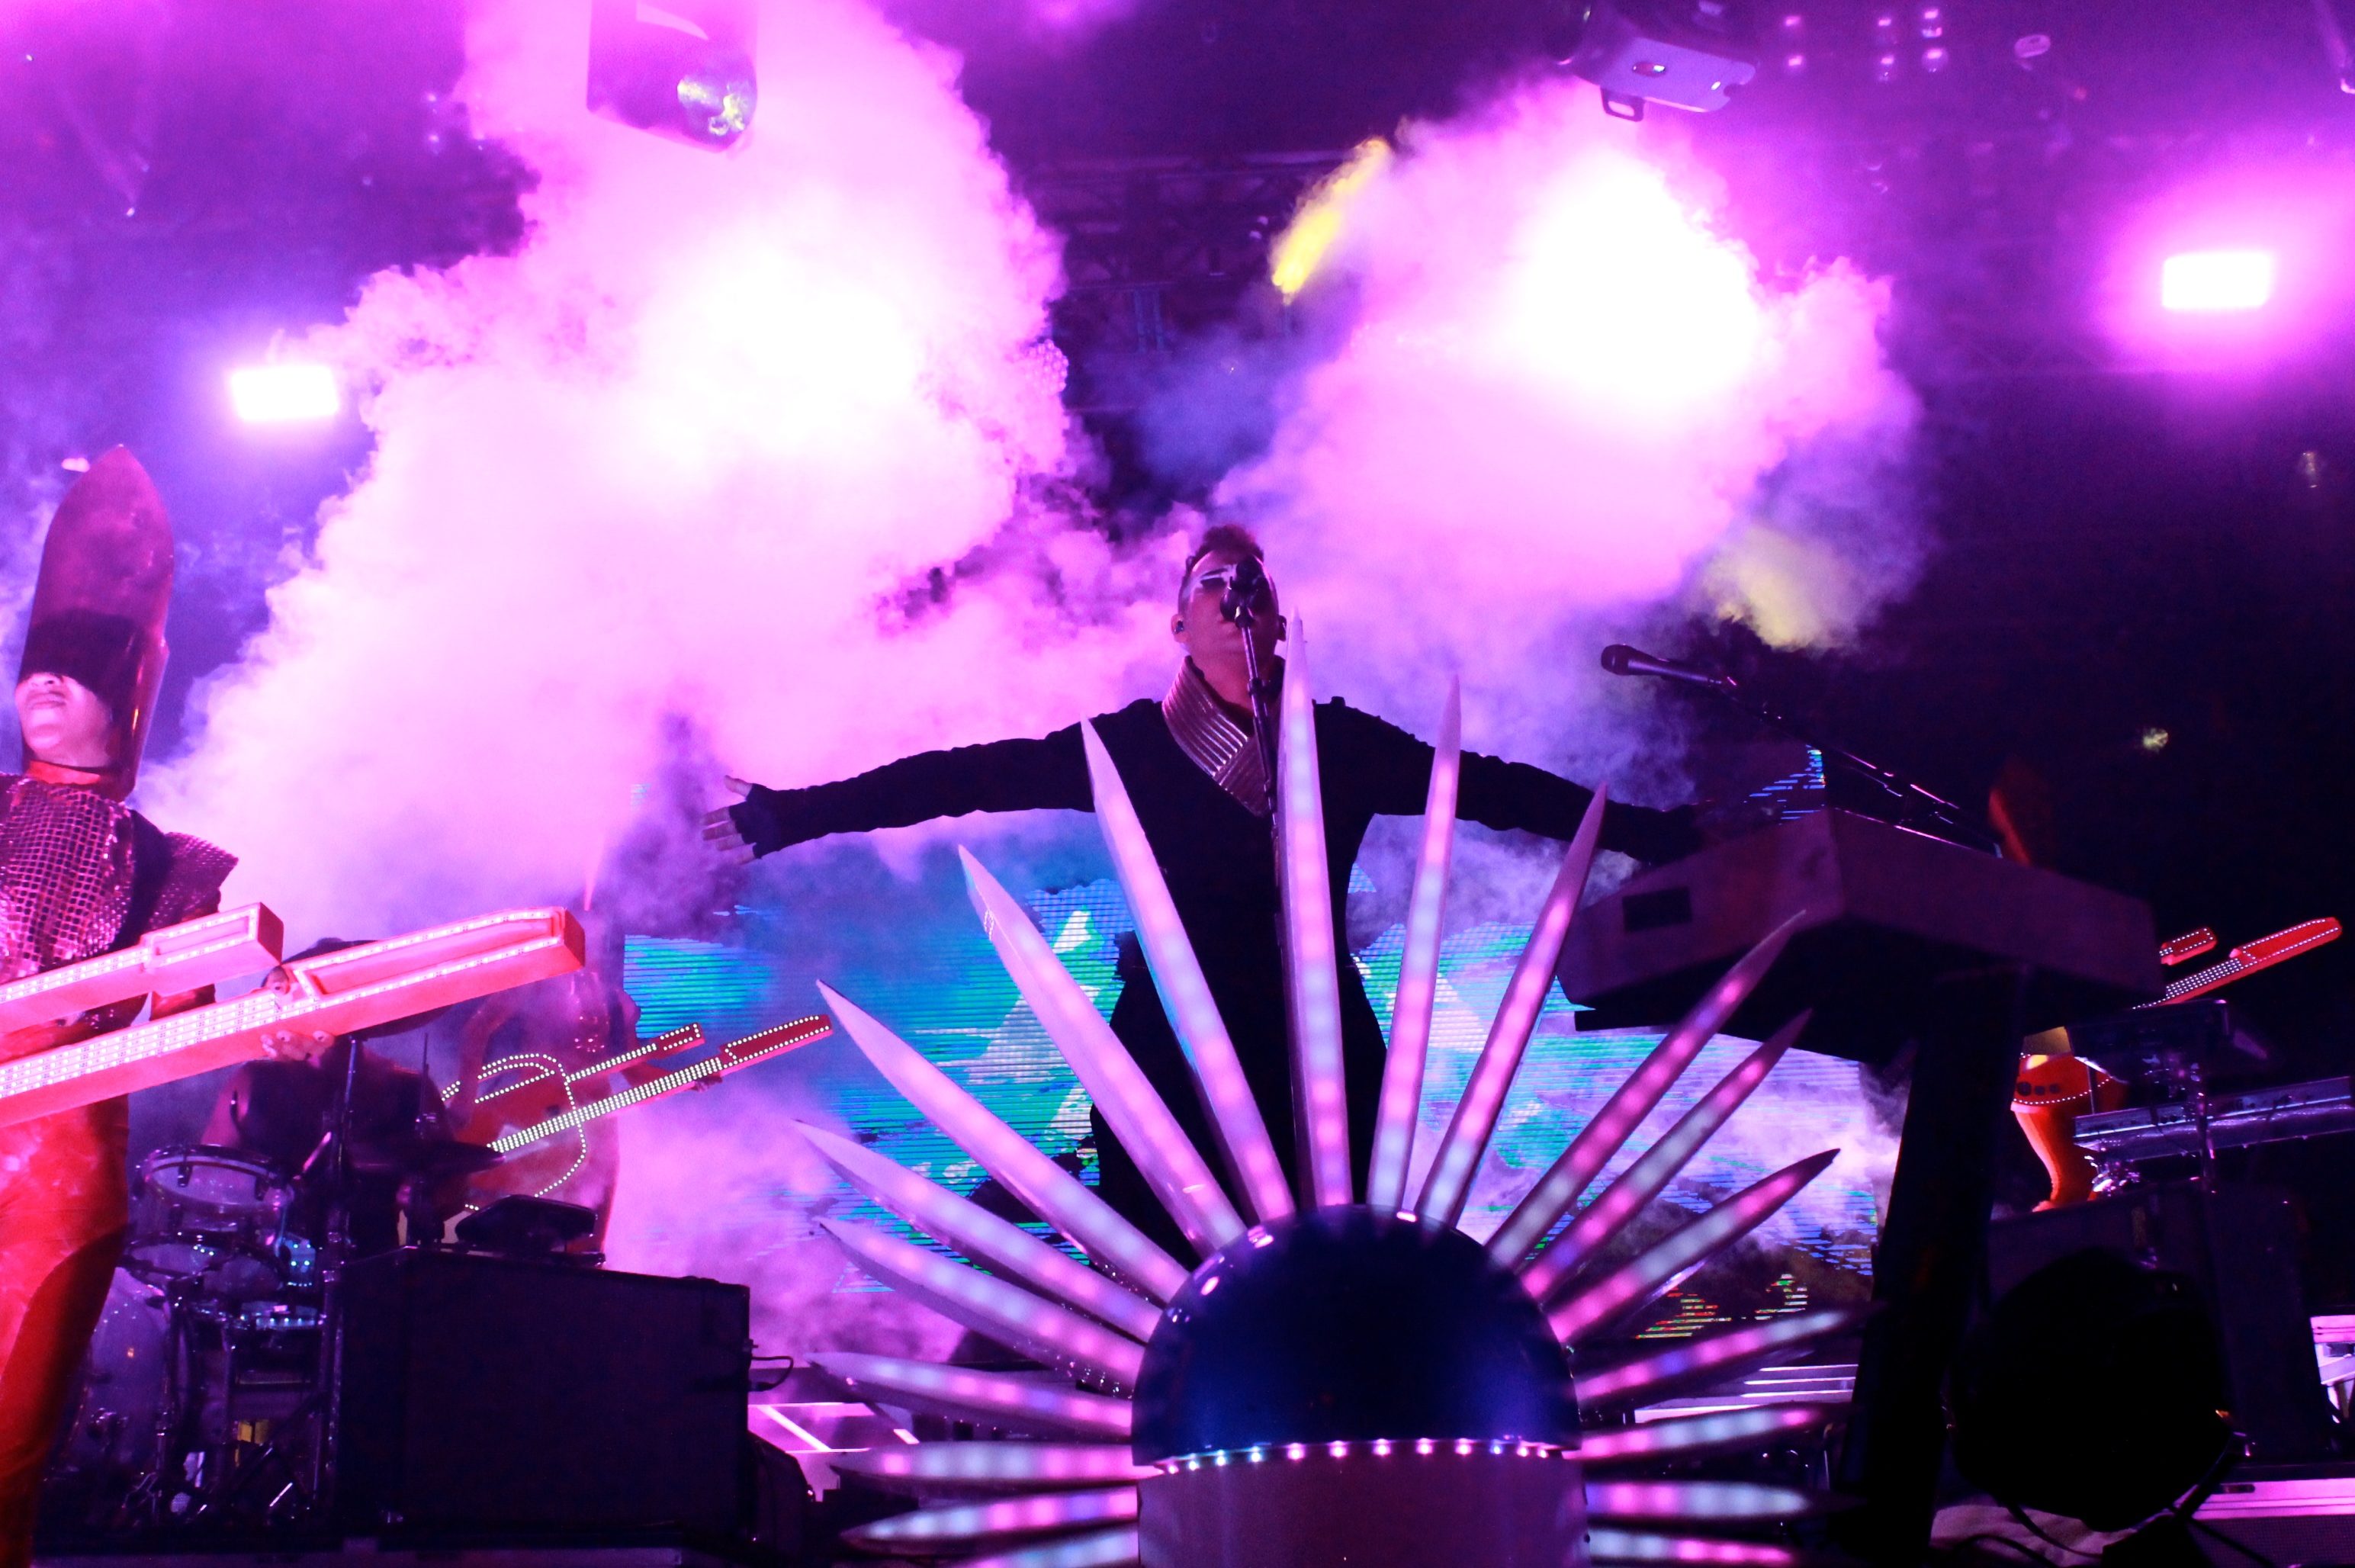 Empire of the Sun Announces New EP On Our Way Home Being Released Tomorrow